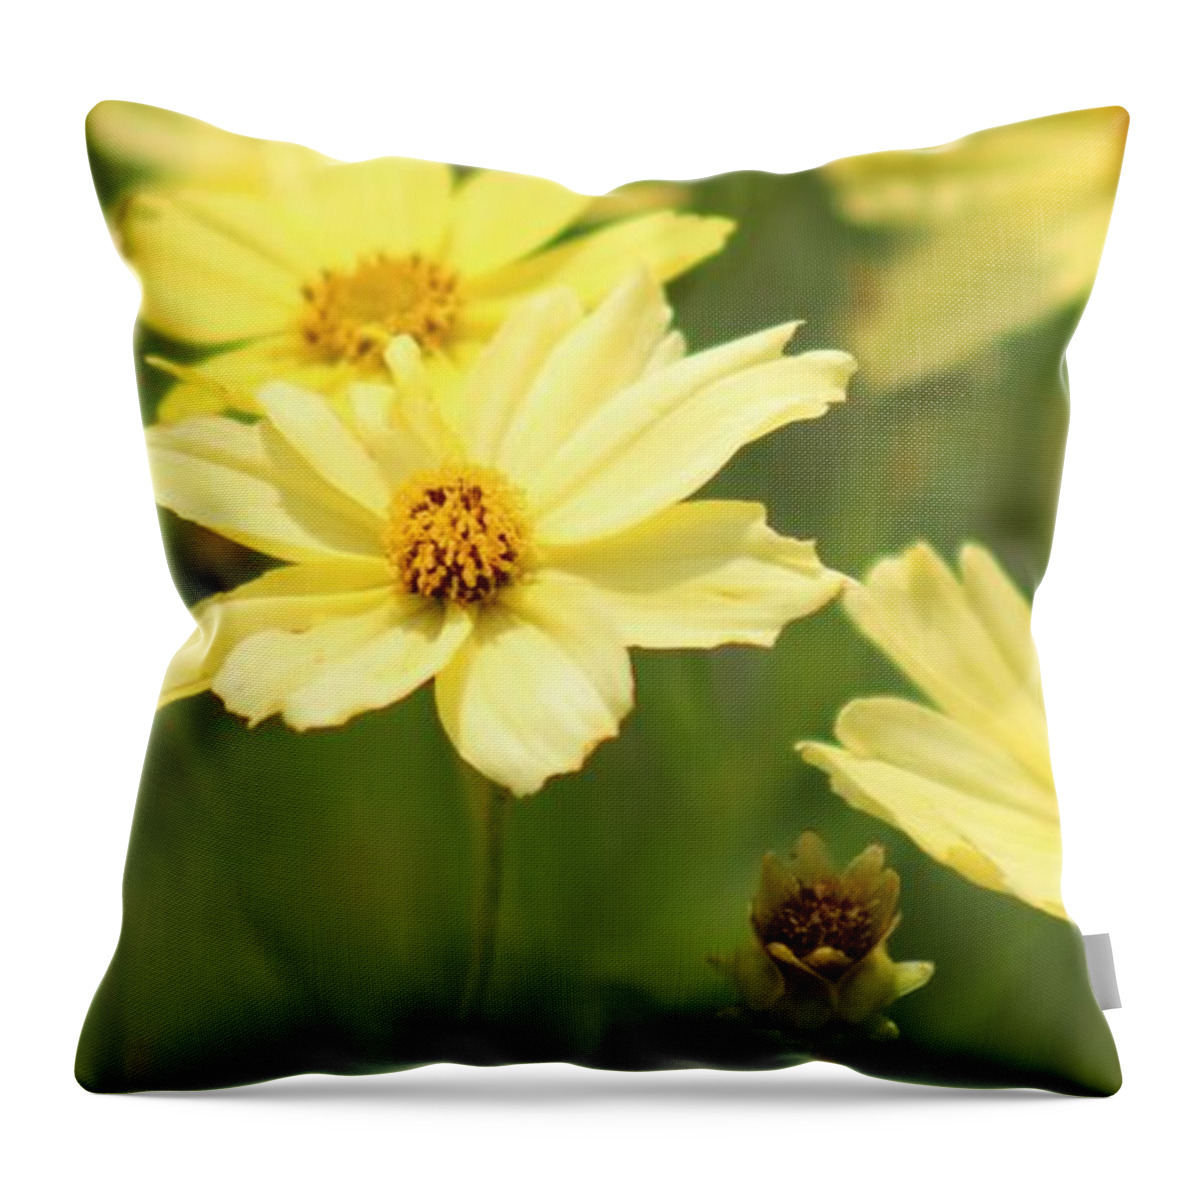 Yellow Throw Pillow featuring the photograph Nature's Beauty 67 by Deena Withycombe